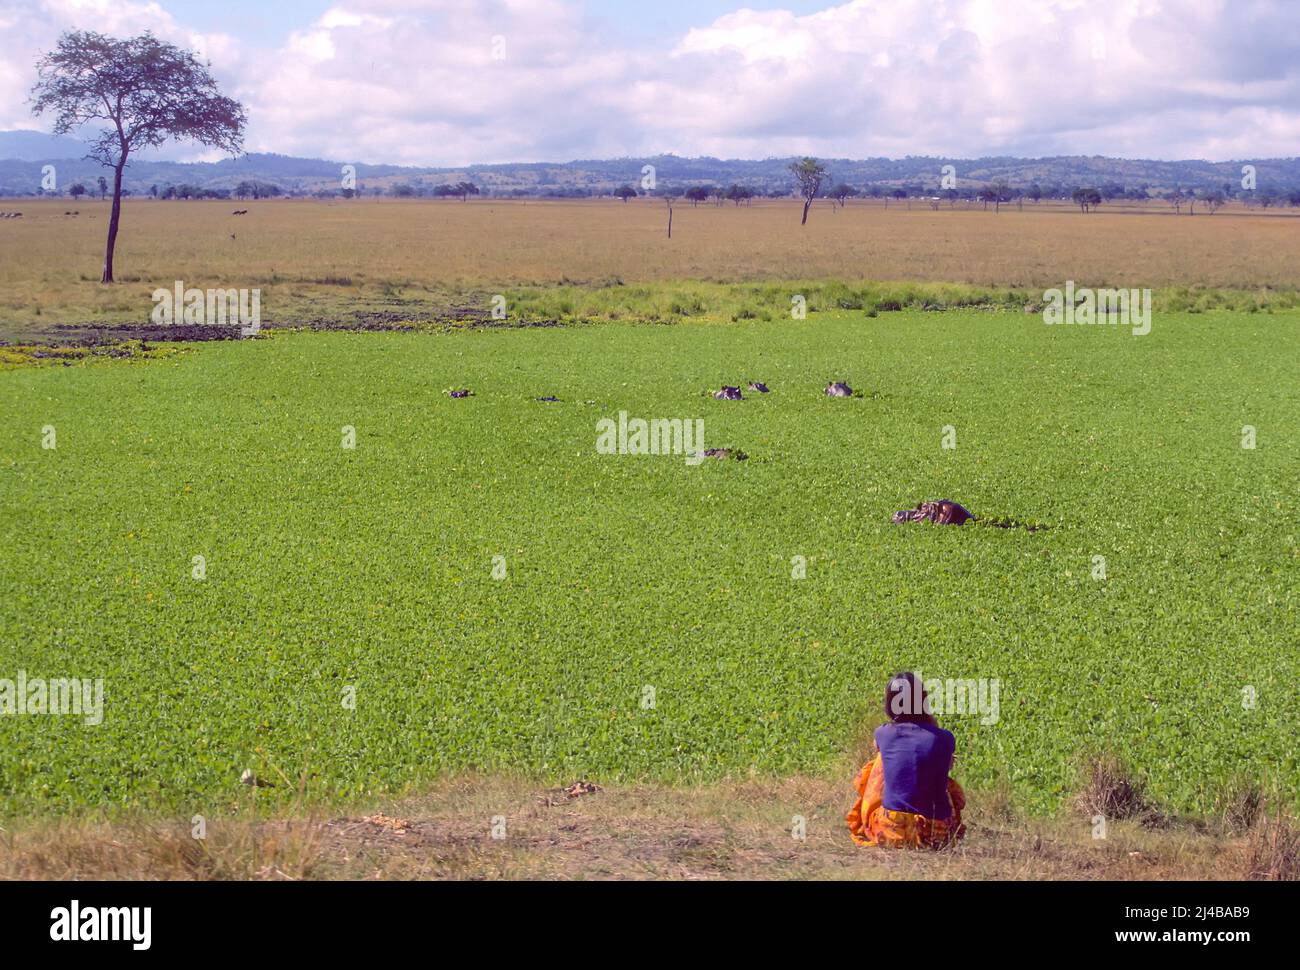 Woman observing hippos in vegetation-covered pool, Tanzania Stock Photo